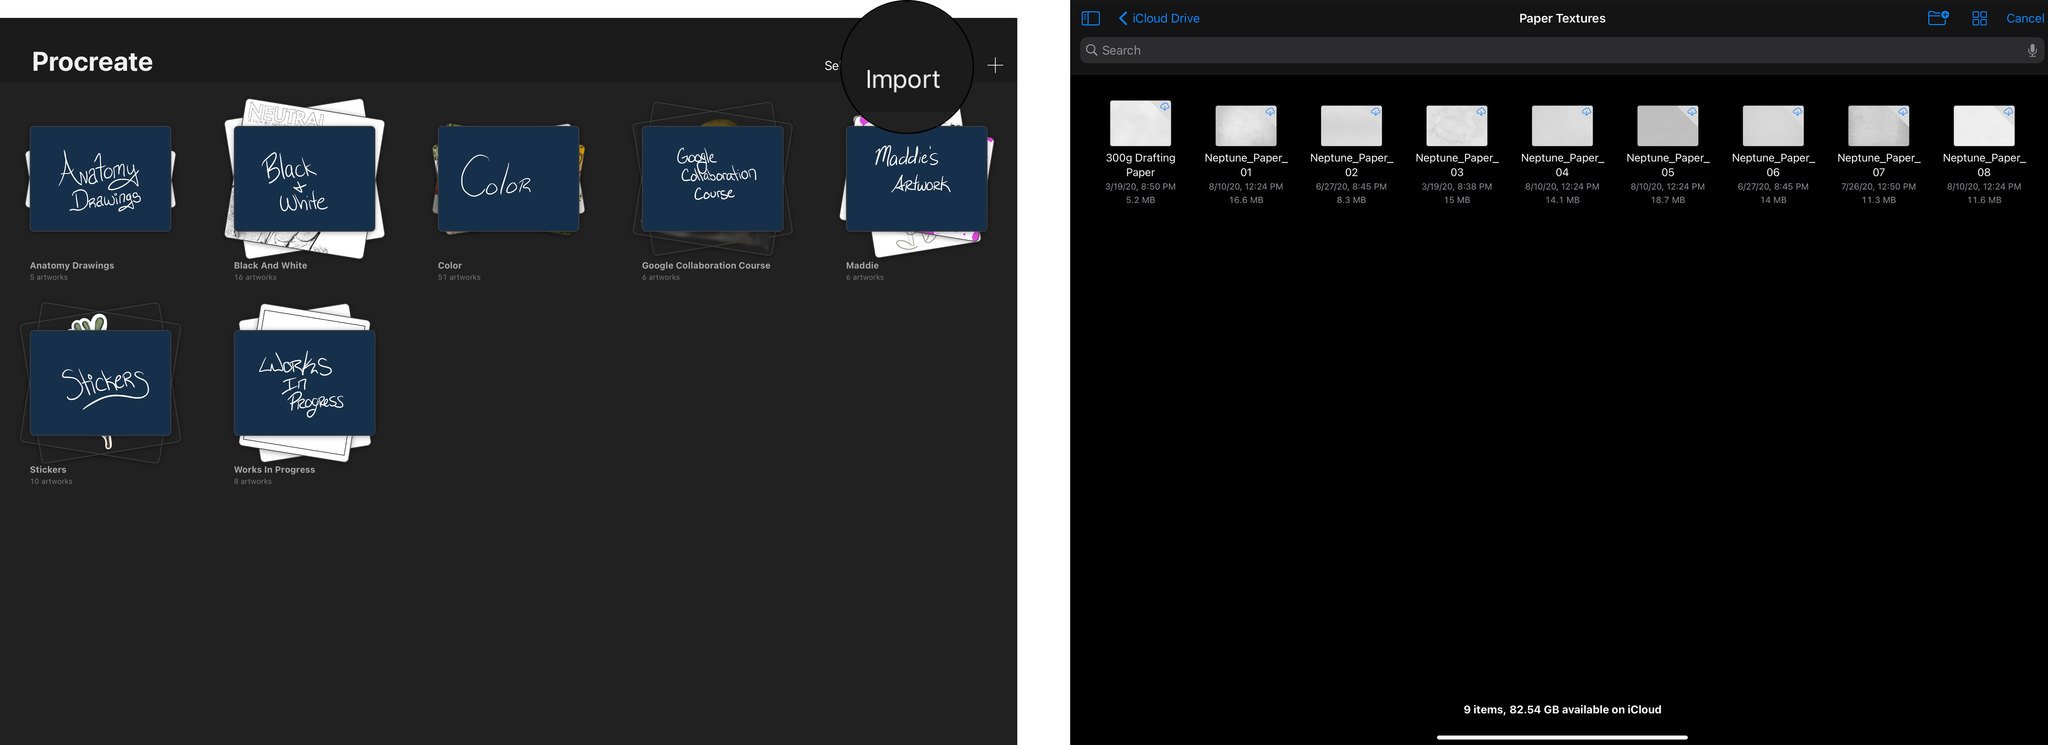 To import a photo from the Files app, tap on the Import button, and then select the desired image.